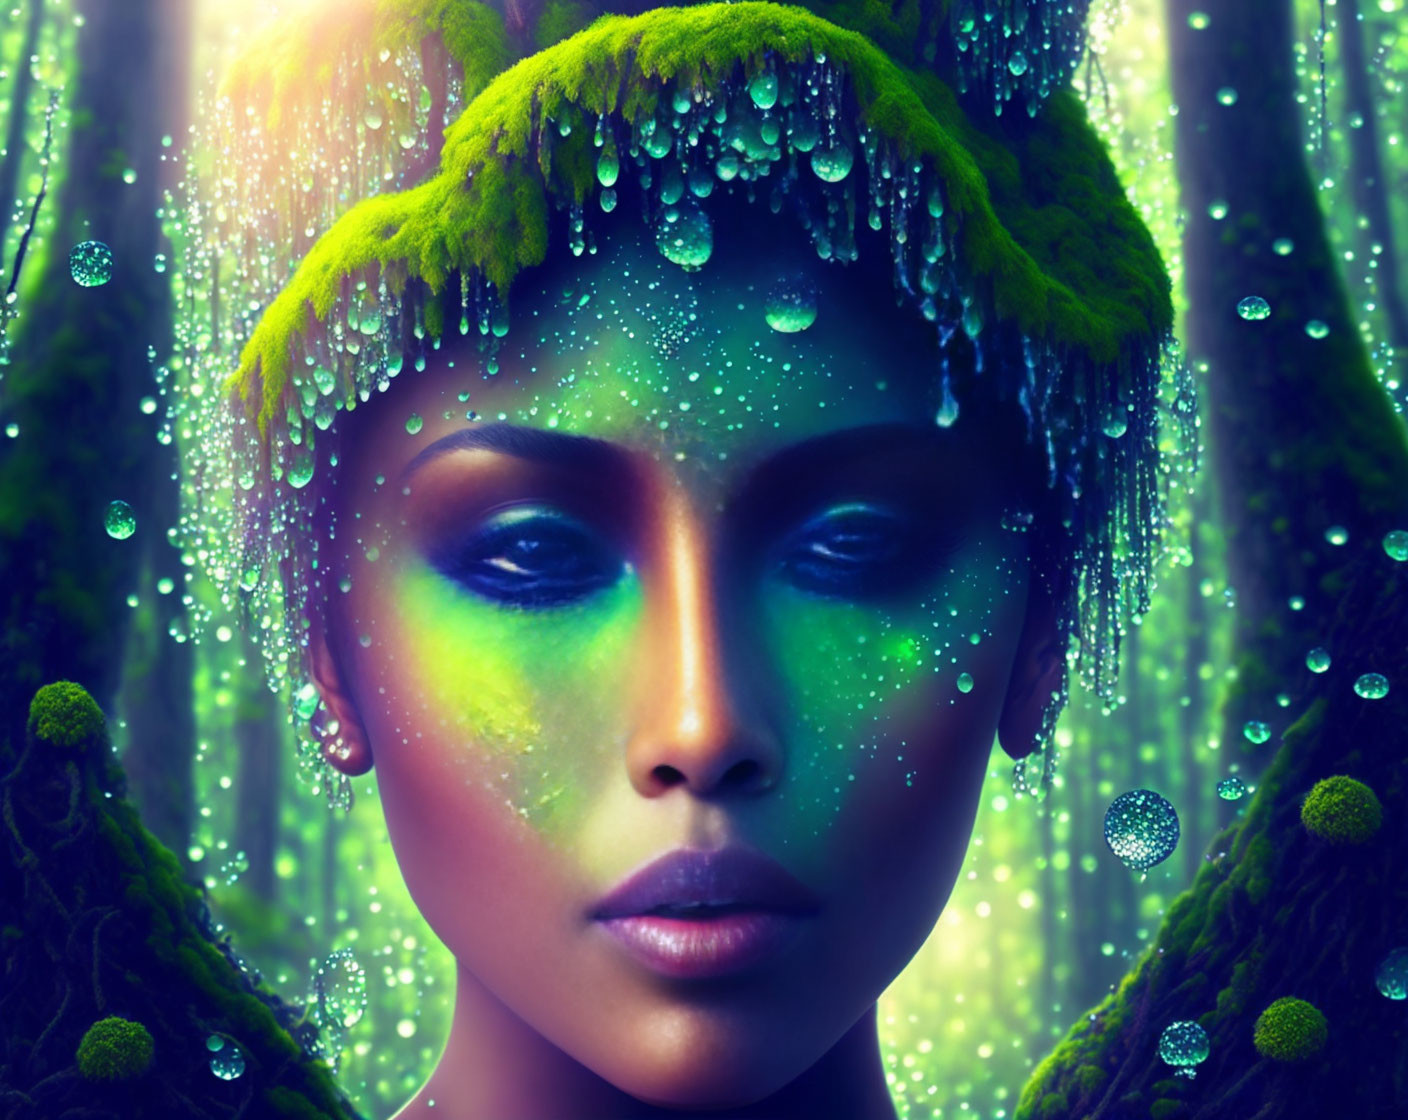 Vibrant green and blue makeup on woman in mystical forest setting